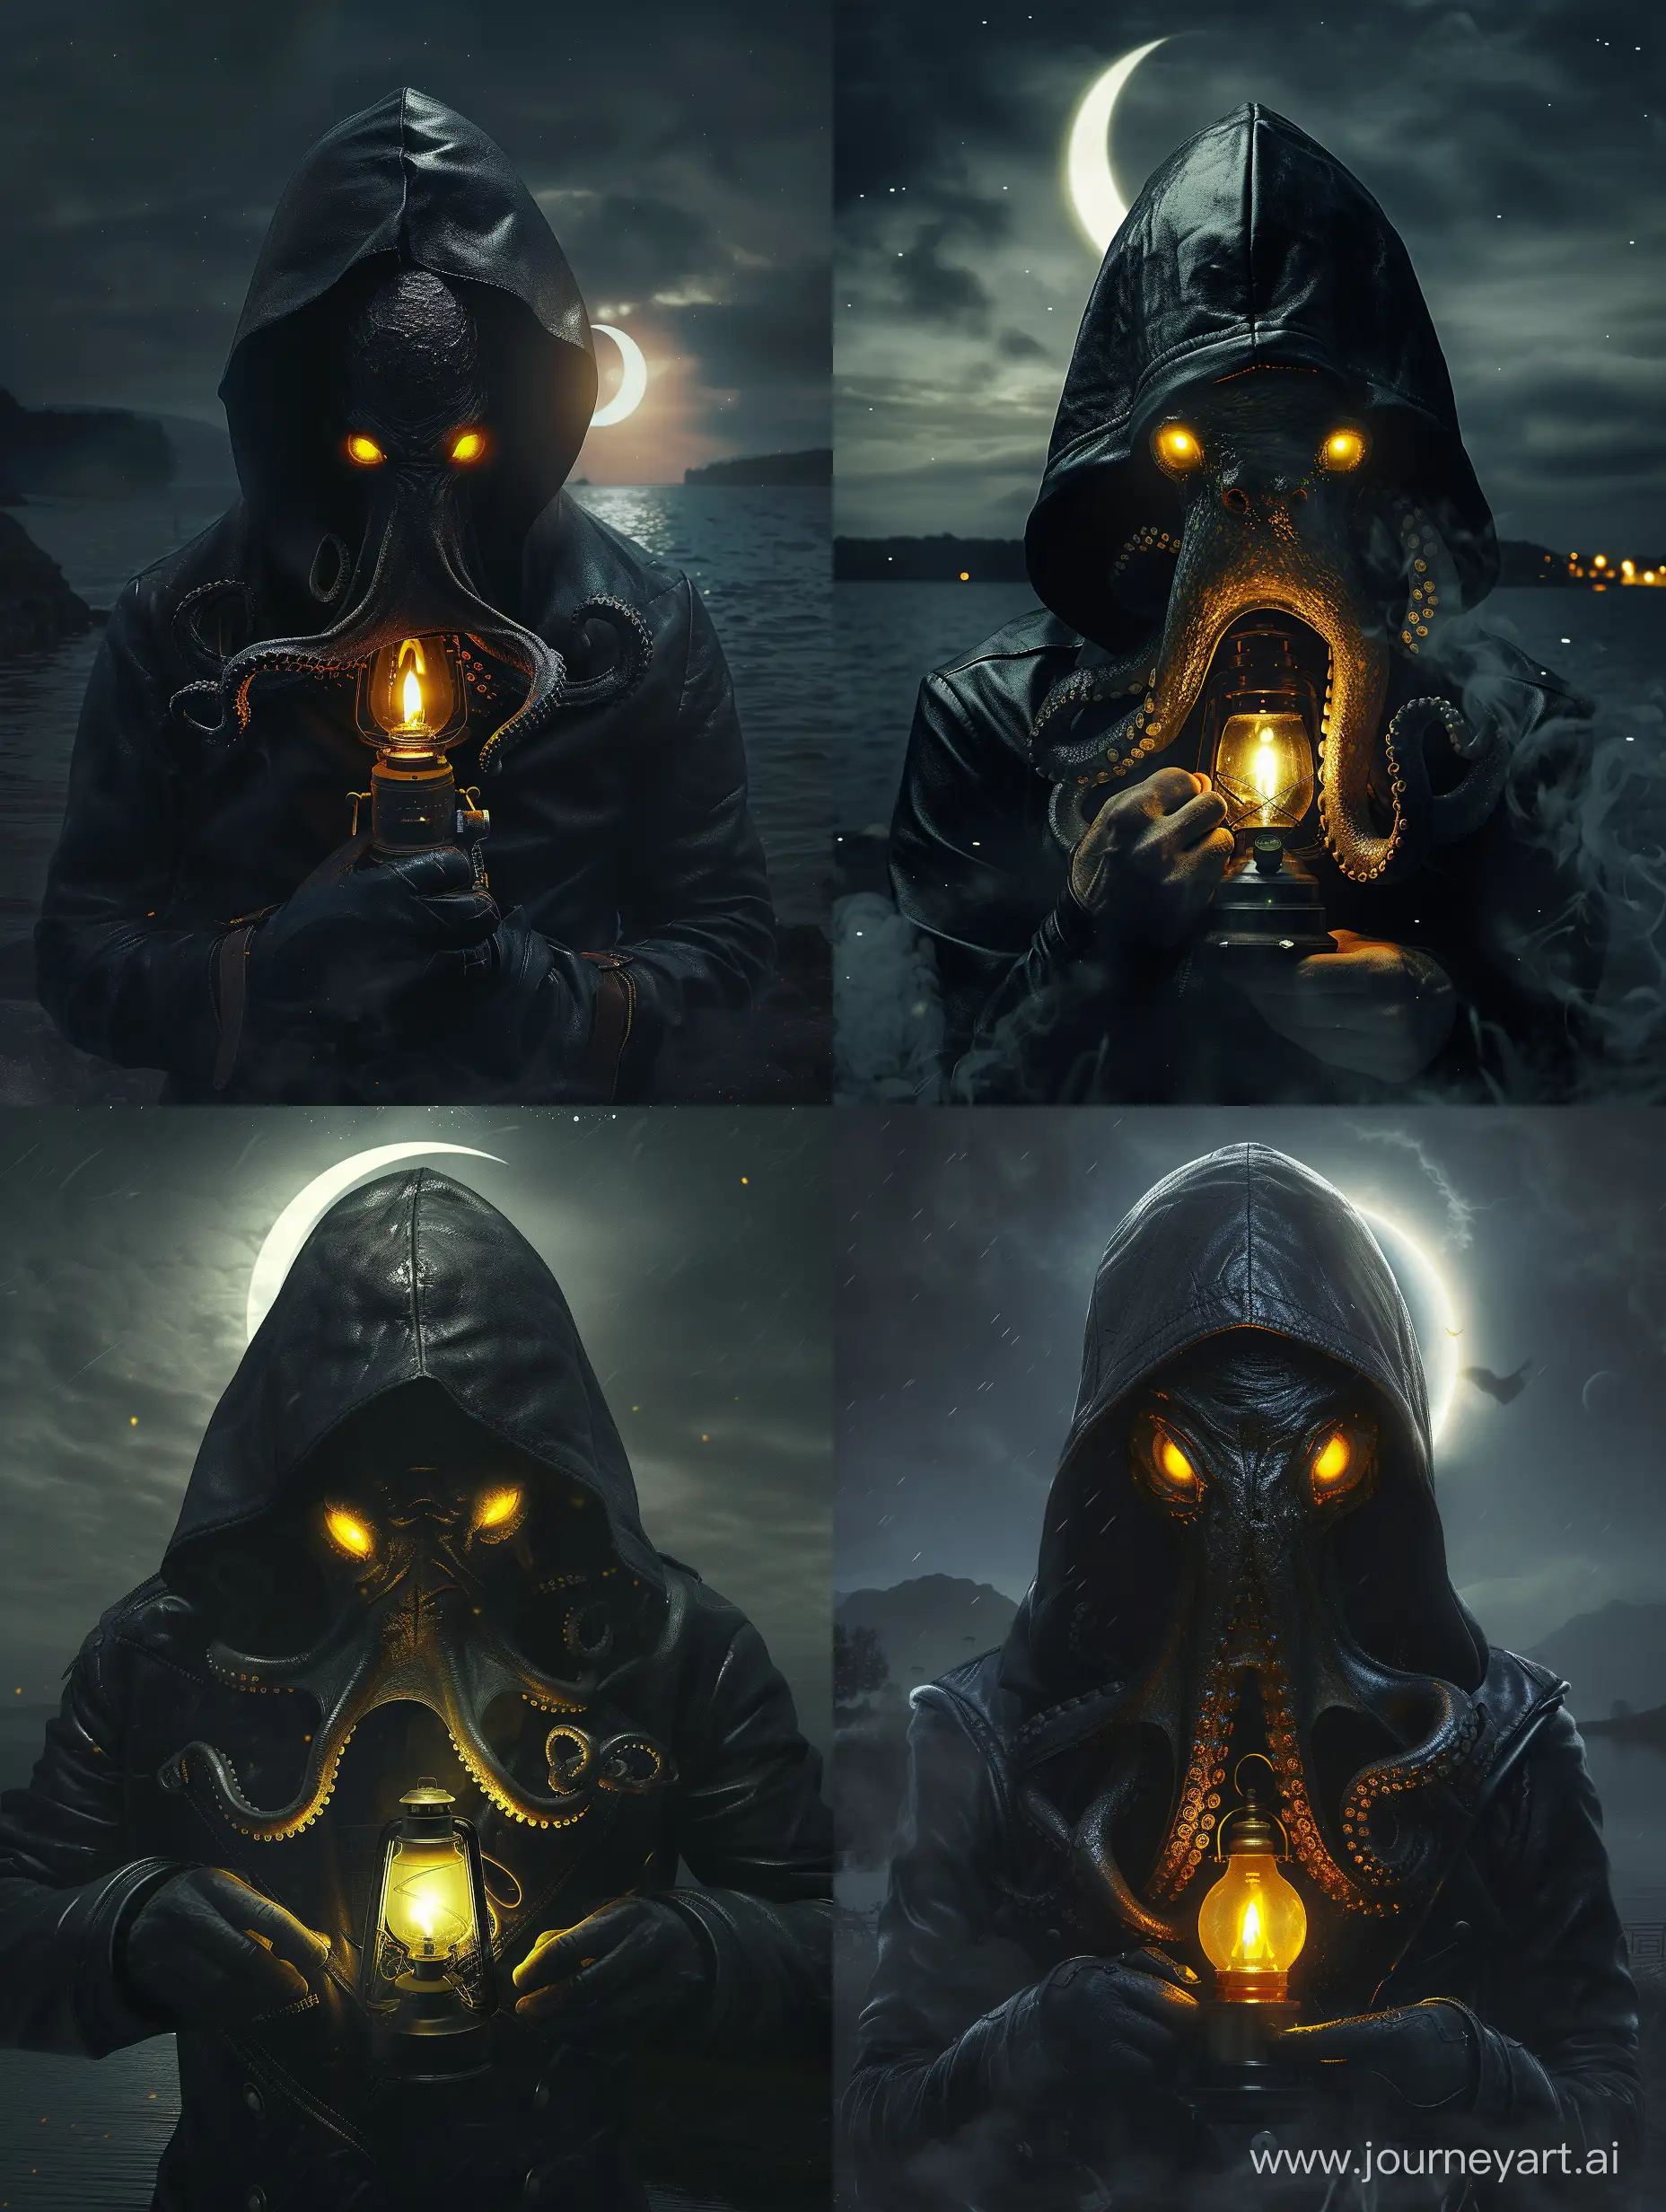 Creepy man with octopus shaped face. Wearing leather black hood. He has a gas lamp in his hands. Yellow glowing eyes. At dark creepy island. Crescent moon. Midnight. Cinematic shot.